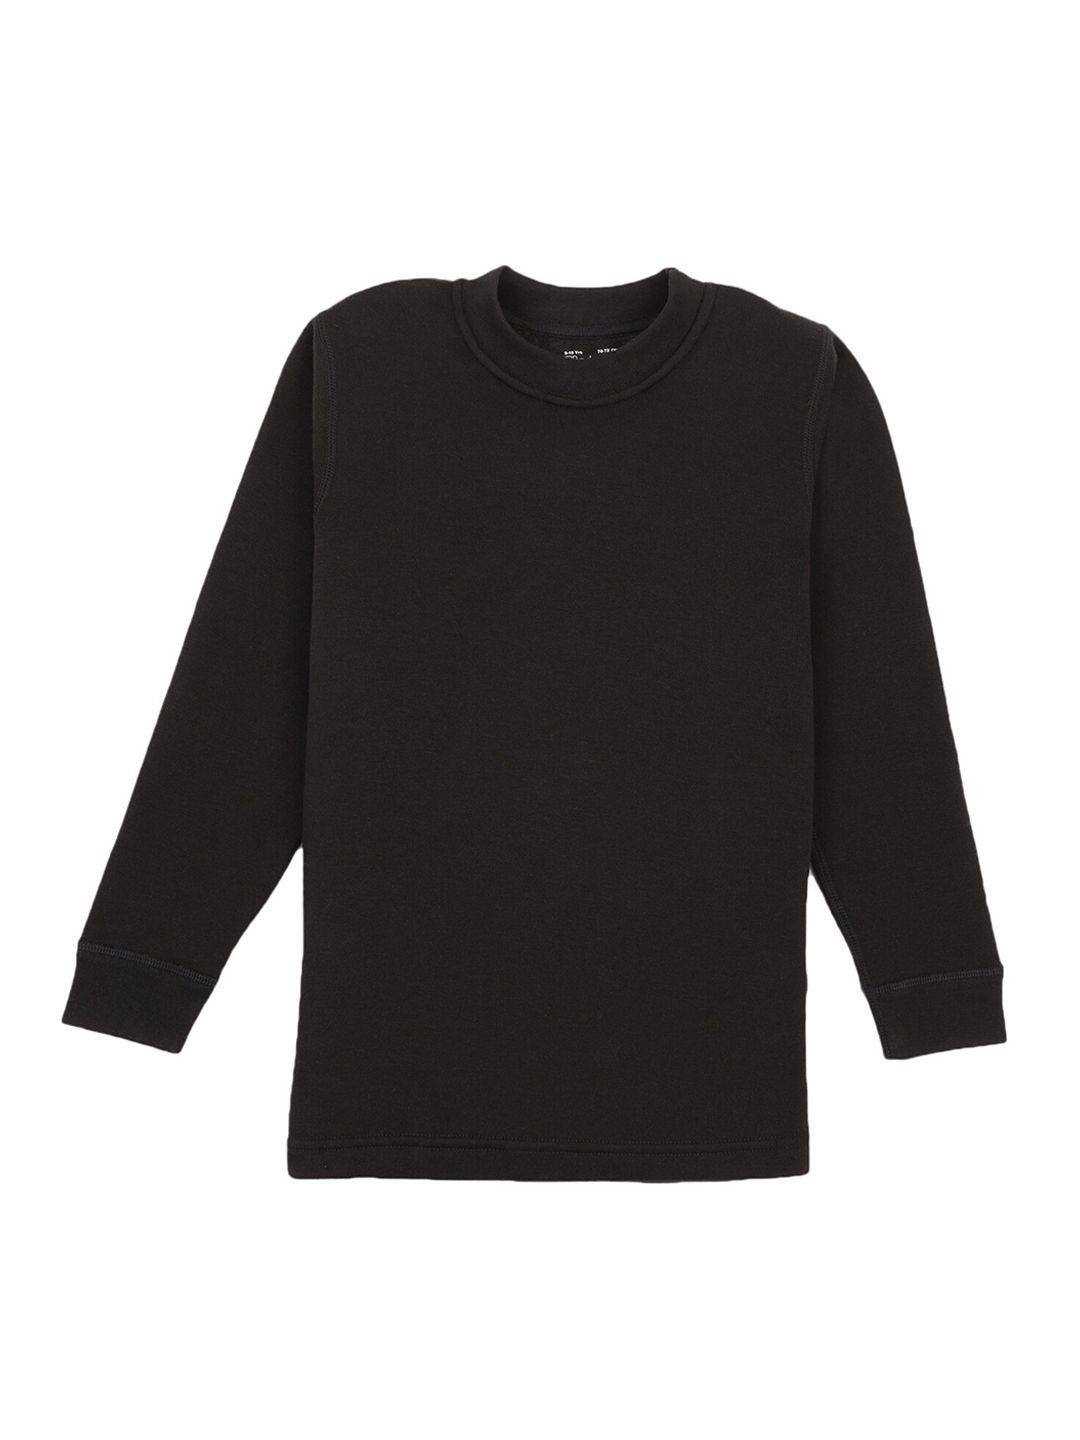 bodycare kids boys black solid cotton thermal top